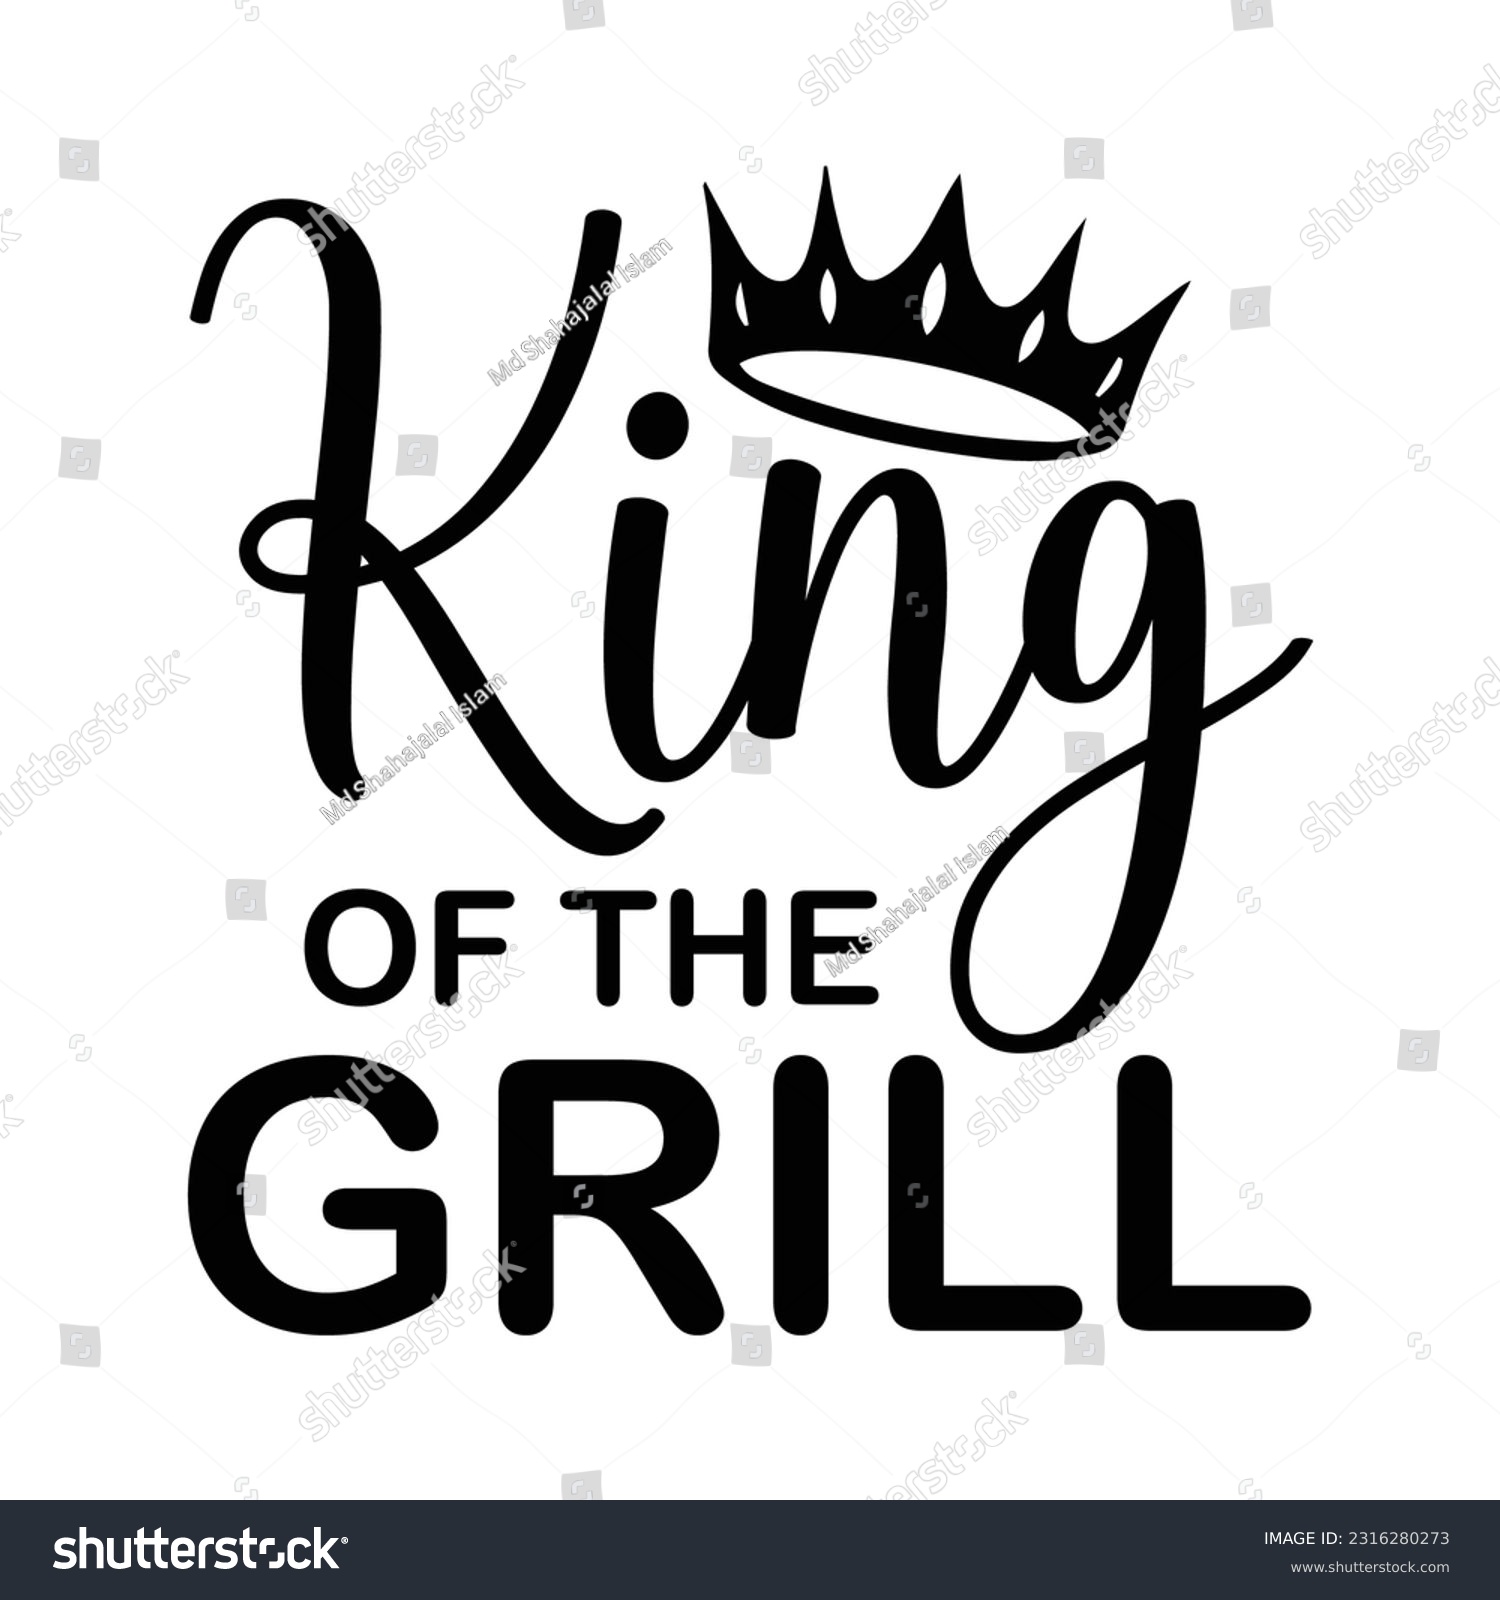 SVG of King of the grill, Father's day shirt design print template, SVG design, Typography design, web template, t shirt design, print, papa, daddy, uncle, Retro vintage style t shirt svg